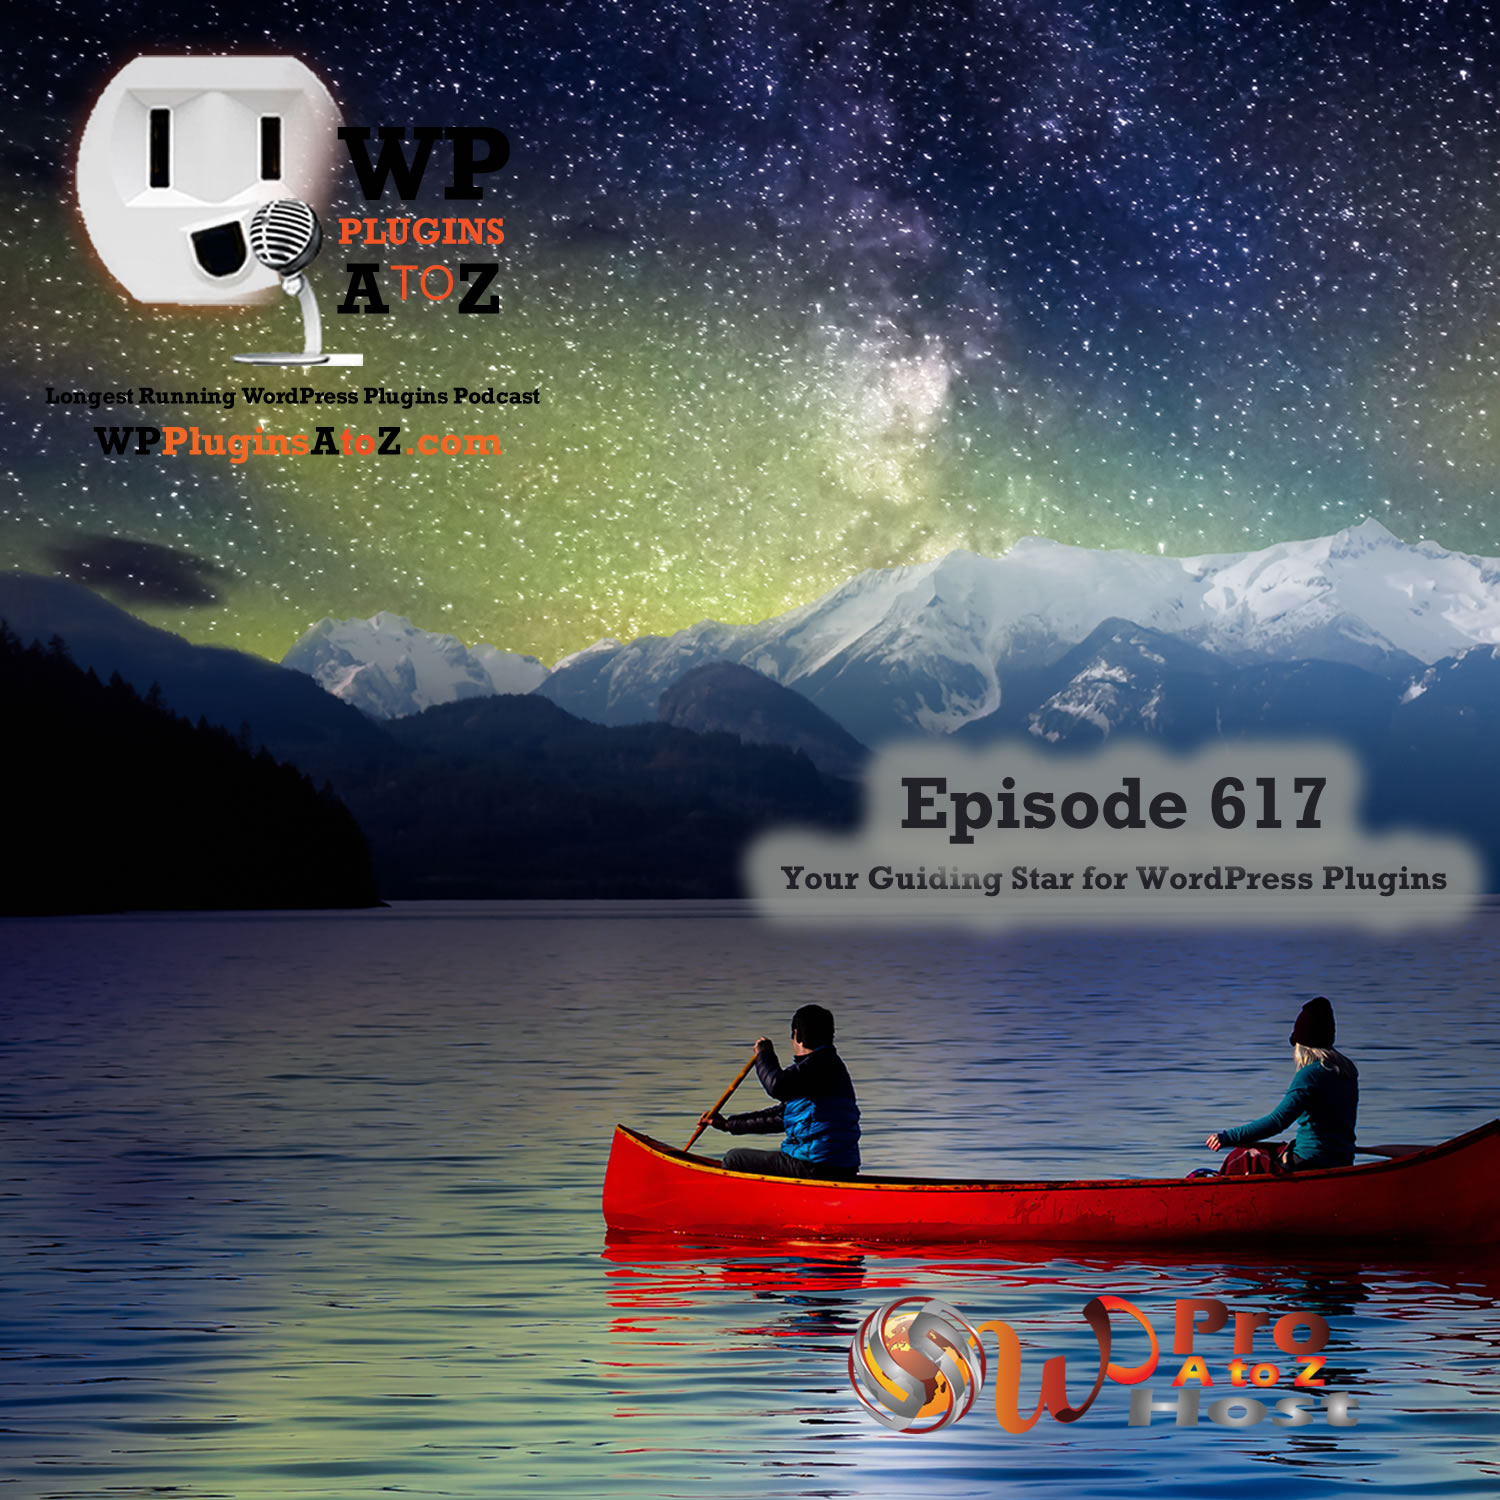 It's Episode 617 and we have plugins for Searching the Fields and Restricting Access... and WordPress News. It's all coming up on WordPress Plugins A-Z!